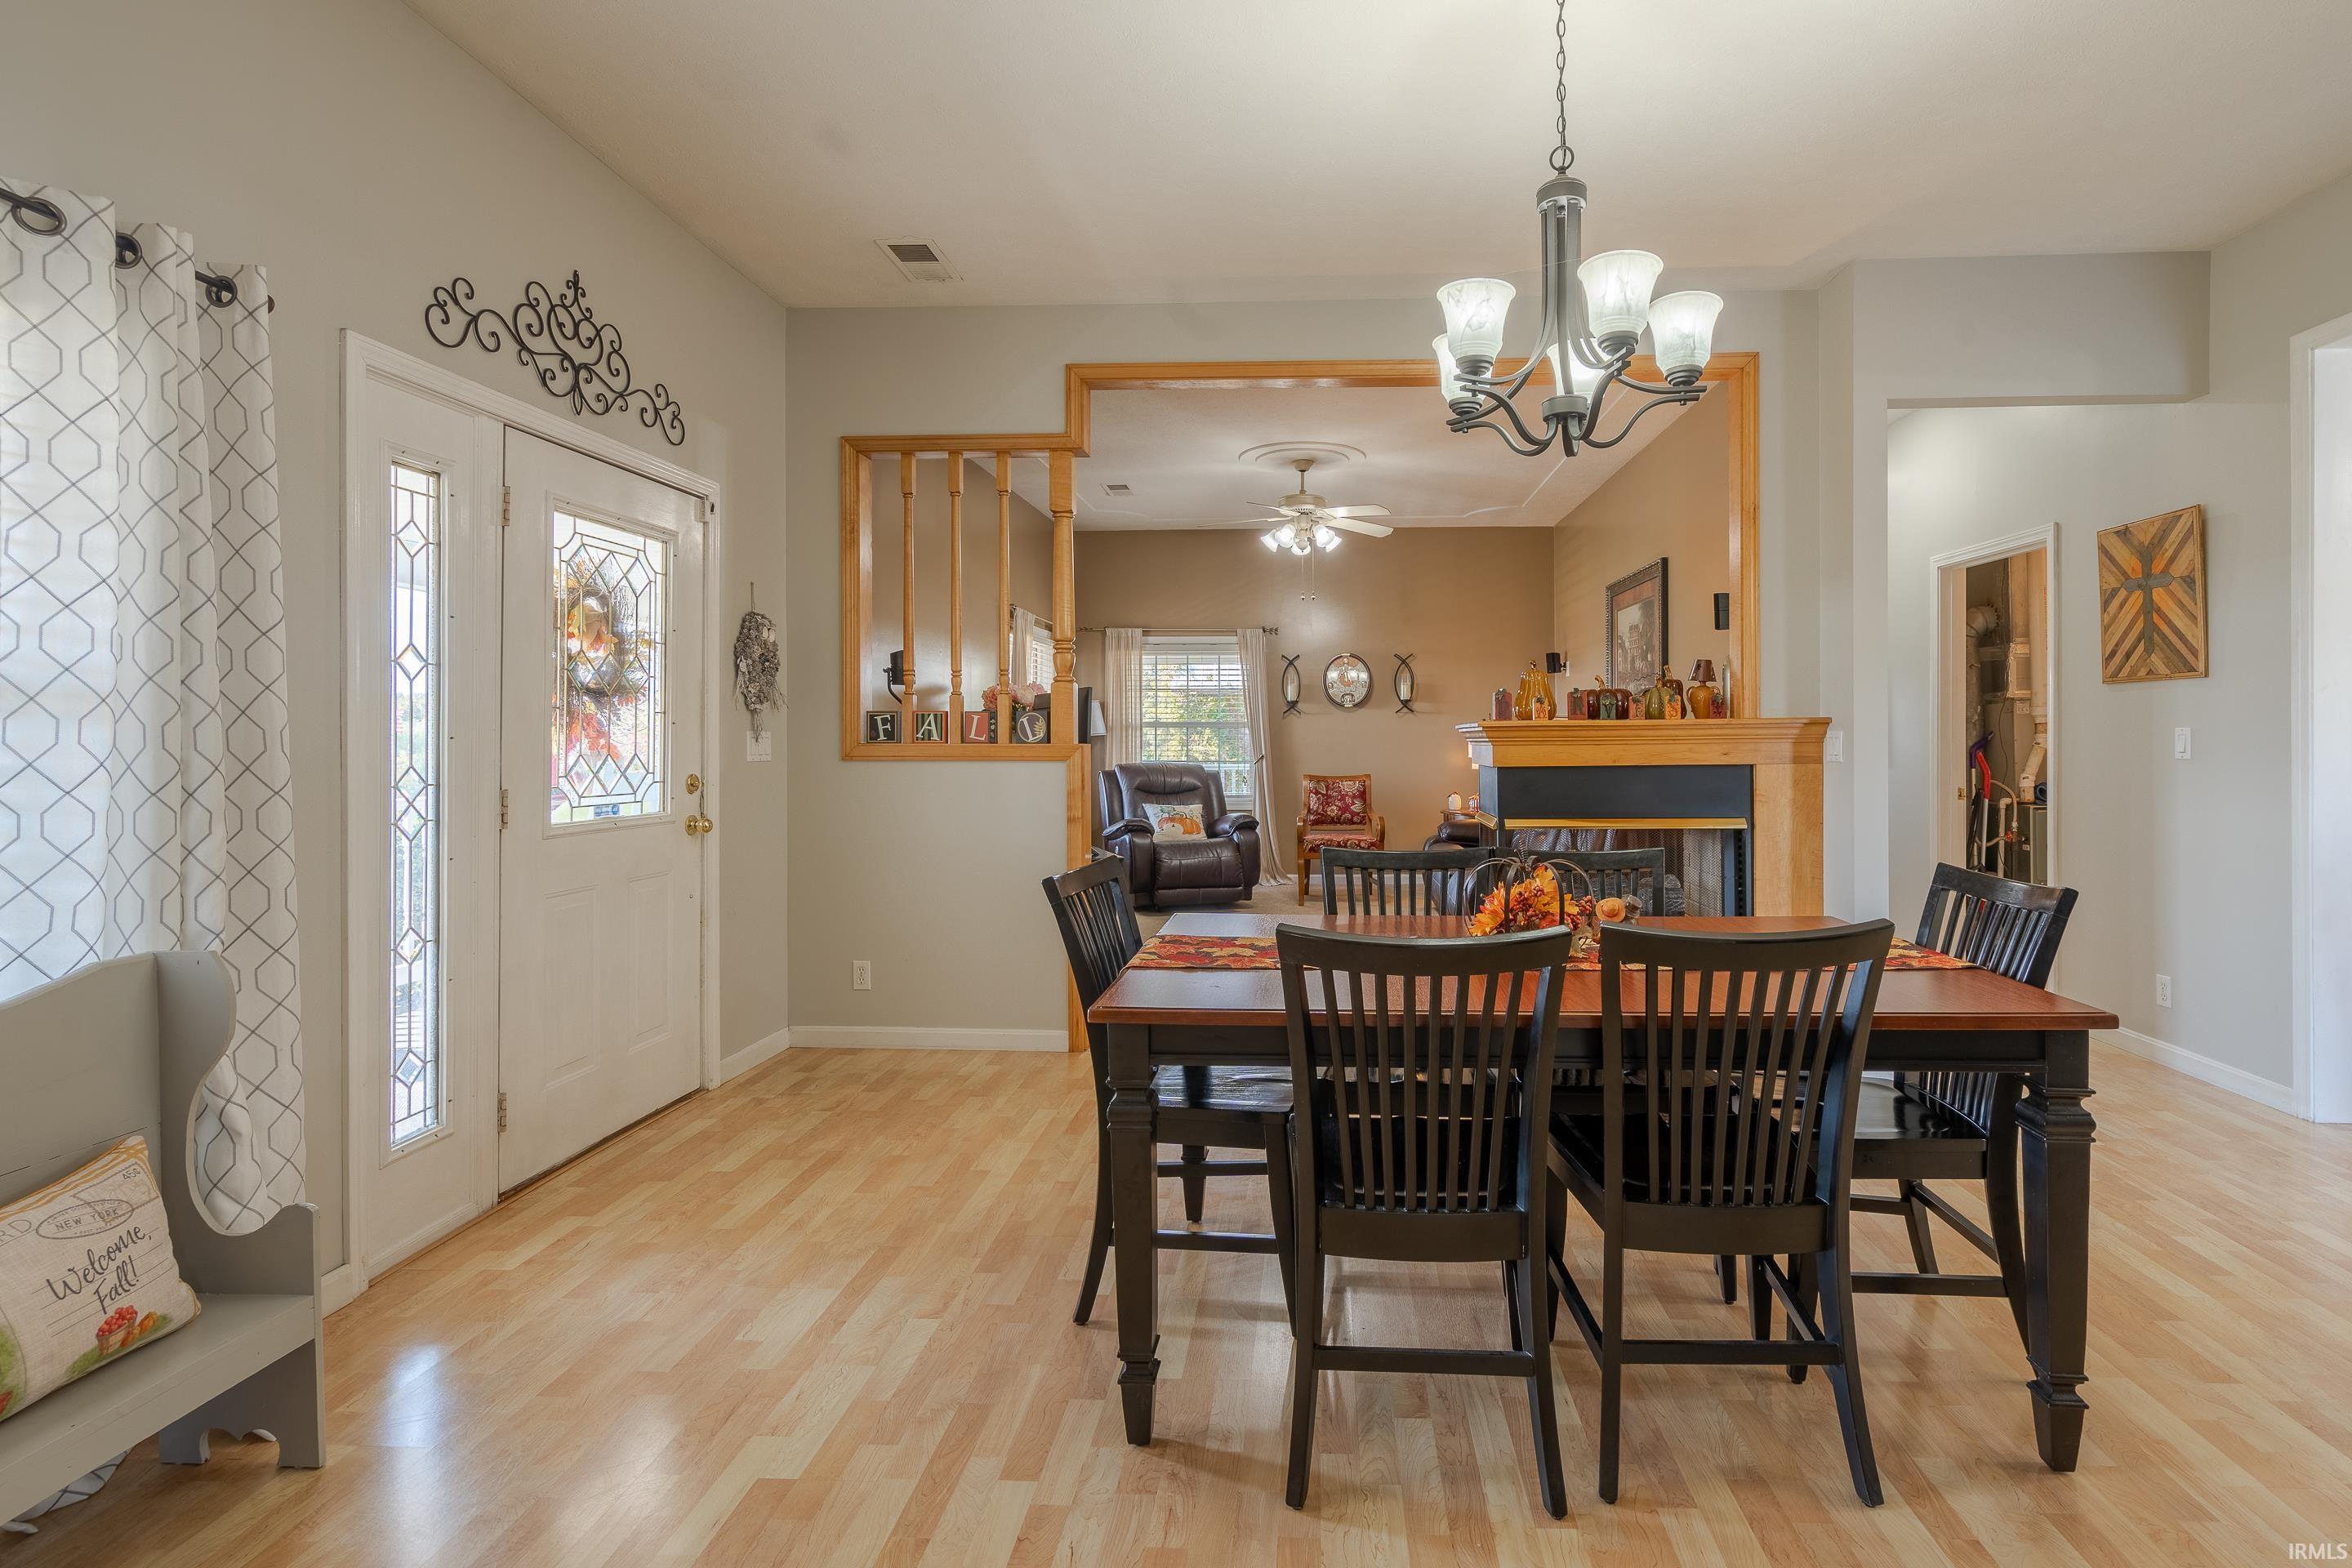 THE FRONT DOOR OPENS INTO A LARGE DINING ROOM WITH WOOD LAMINATE FLOORING.